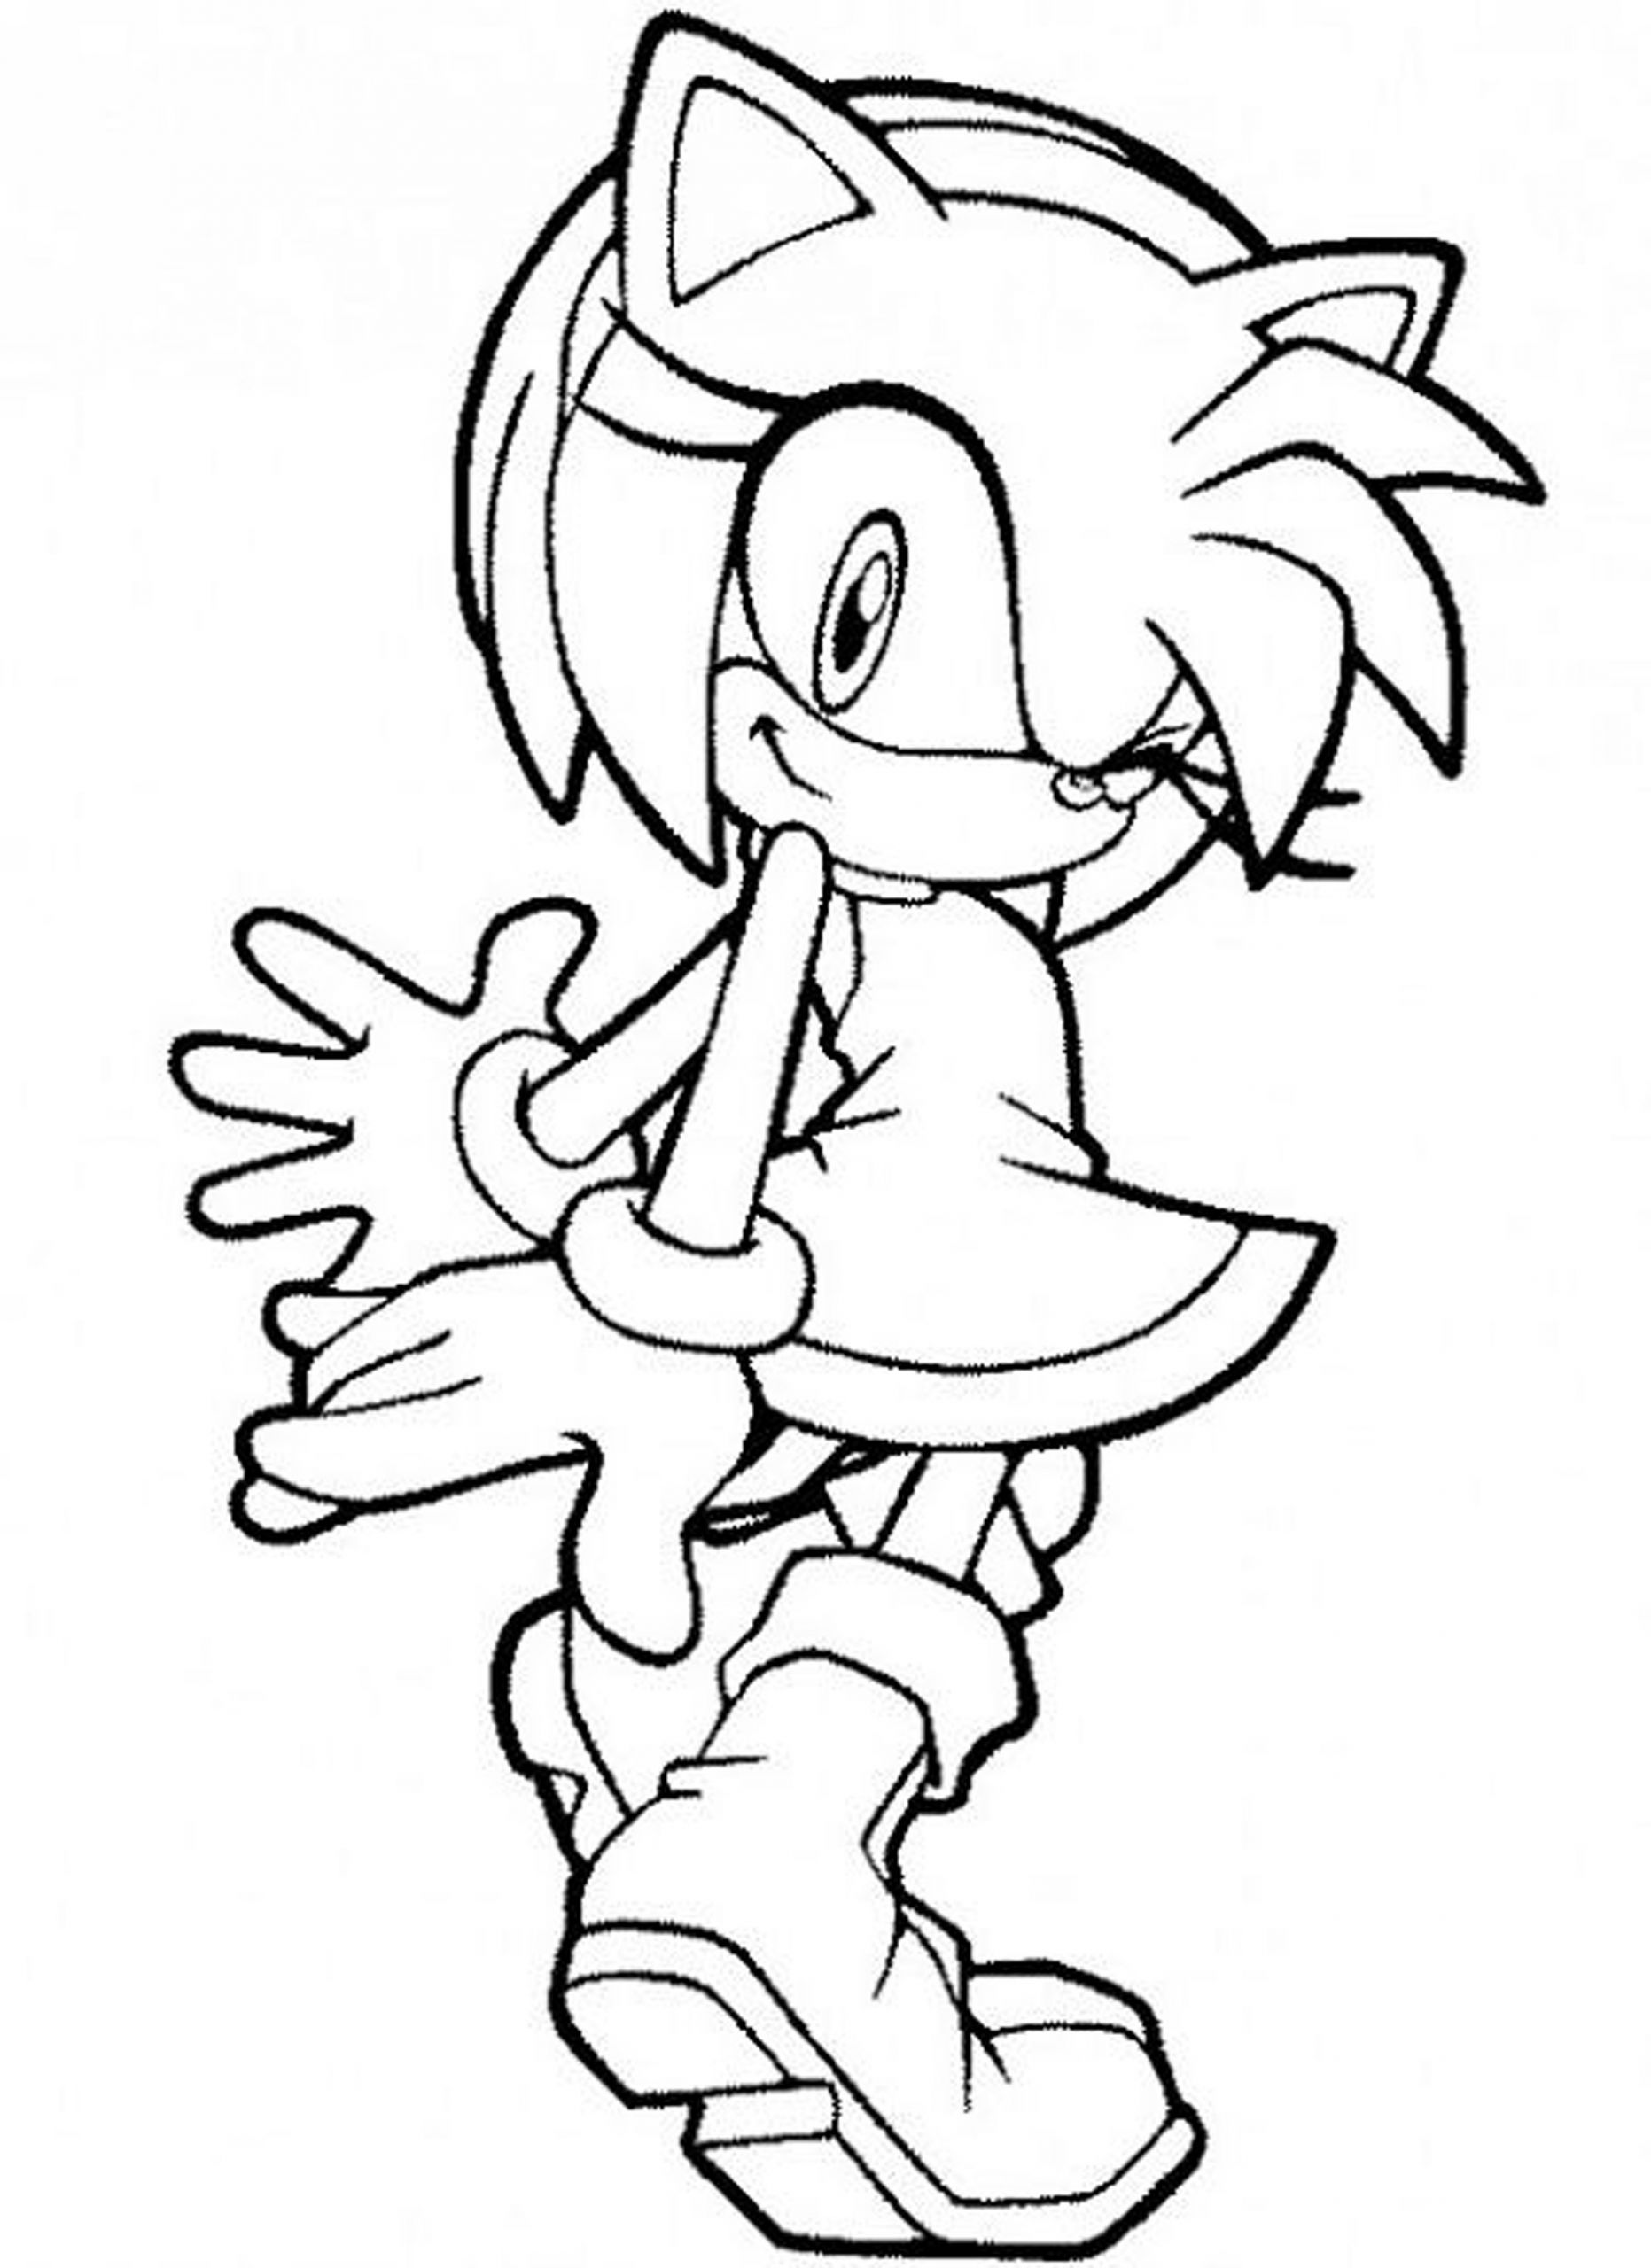 Online Coloring Pages For Girls
 Coloring Pages For Girls 9 And Up